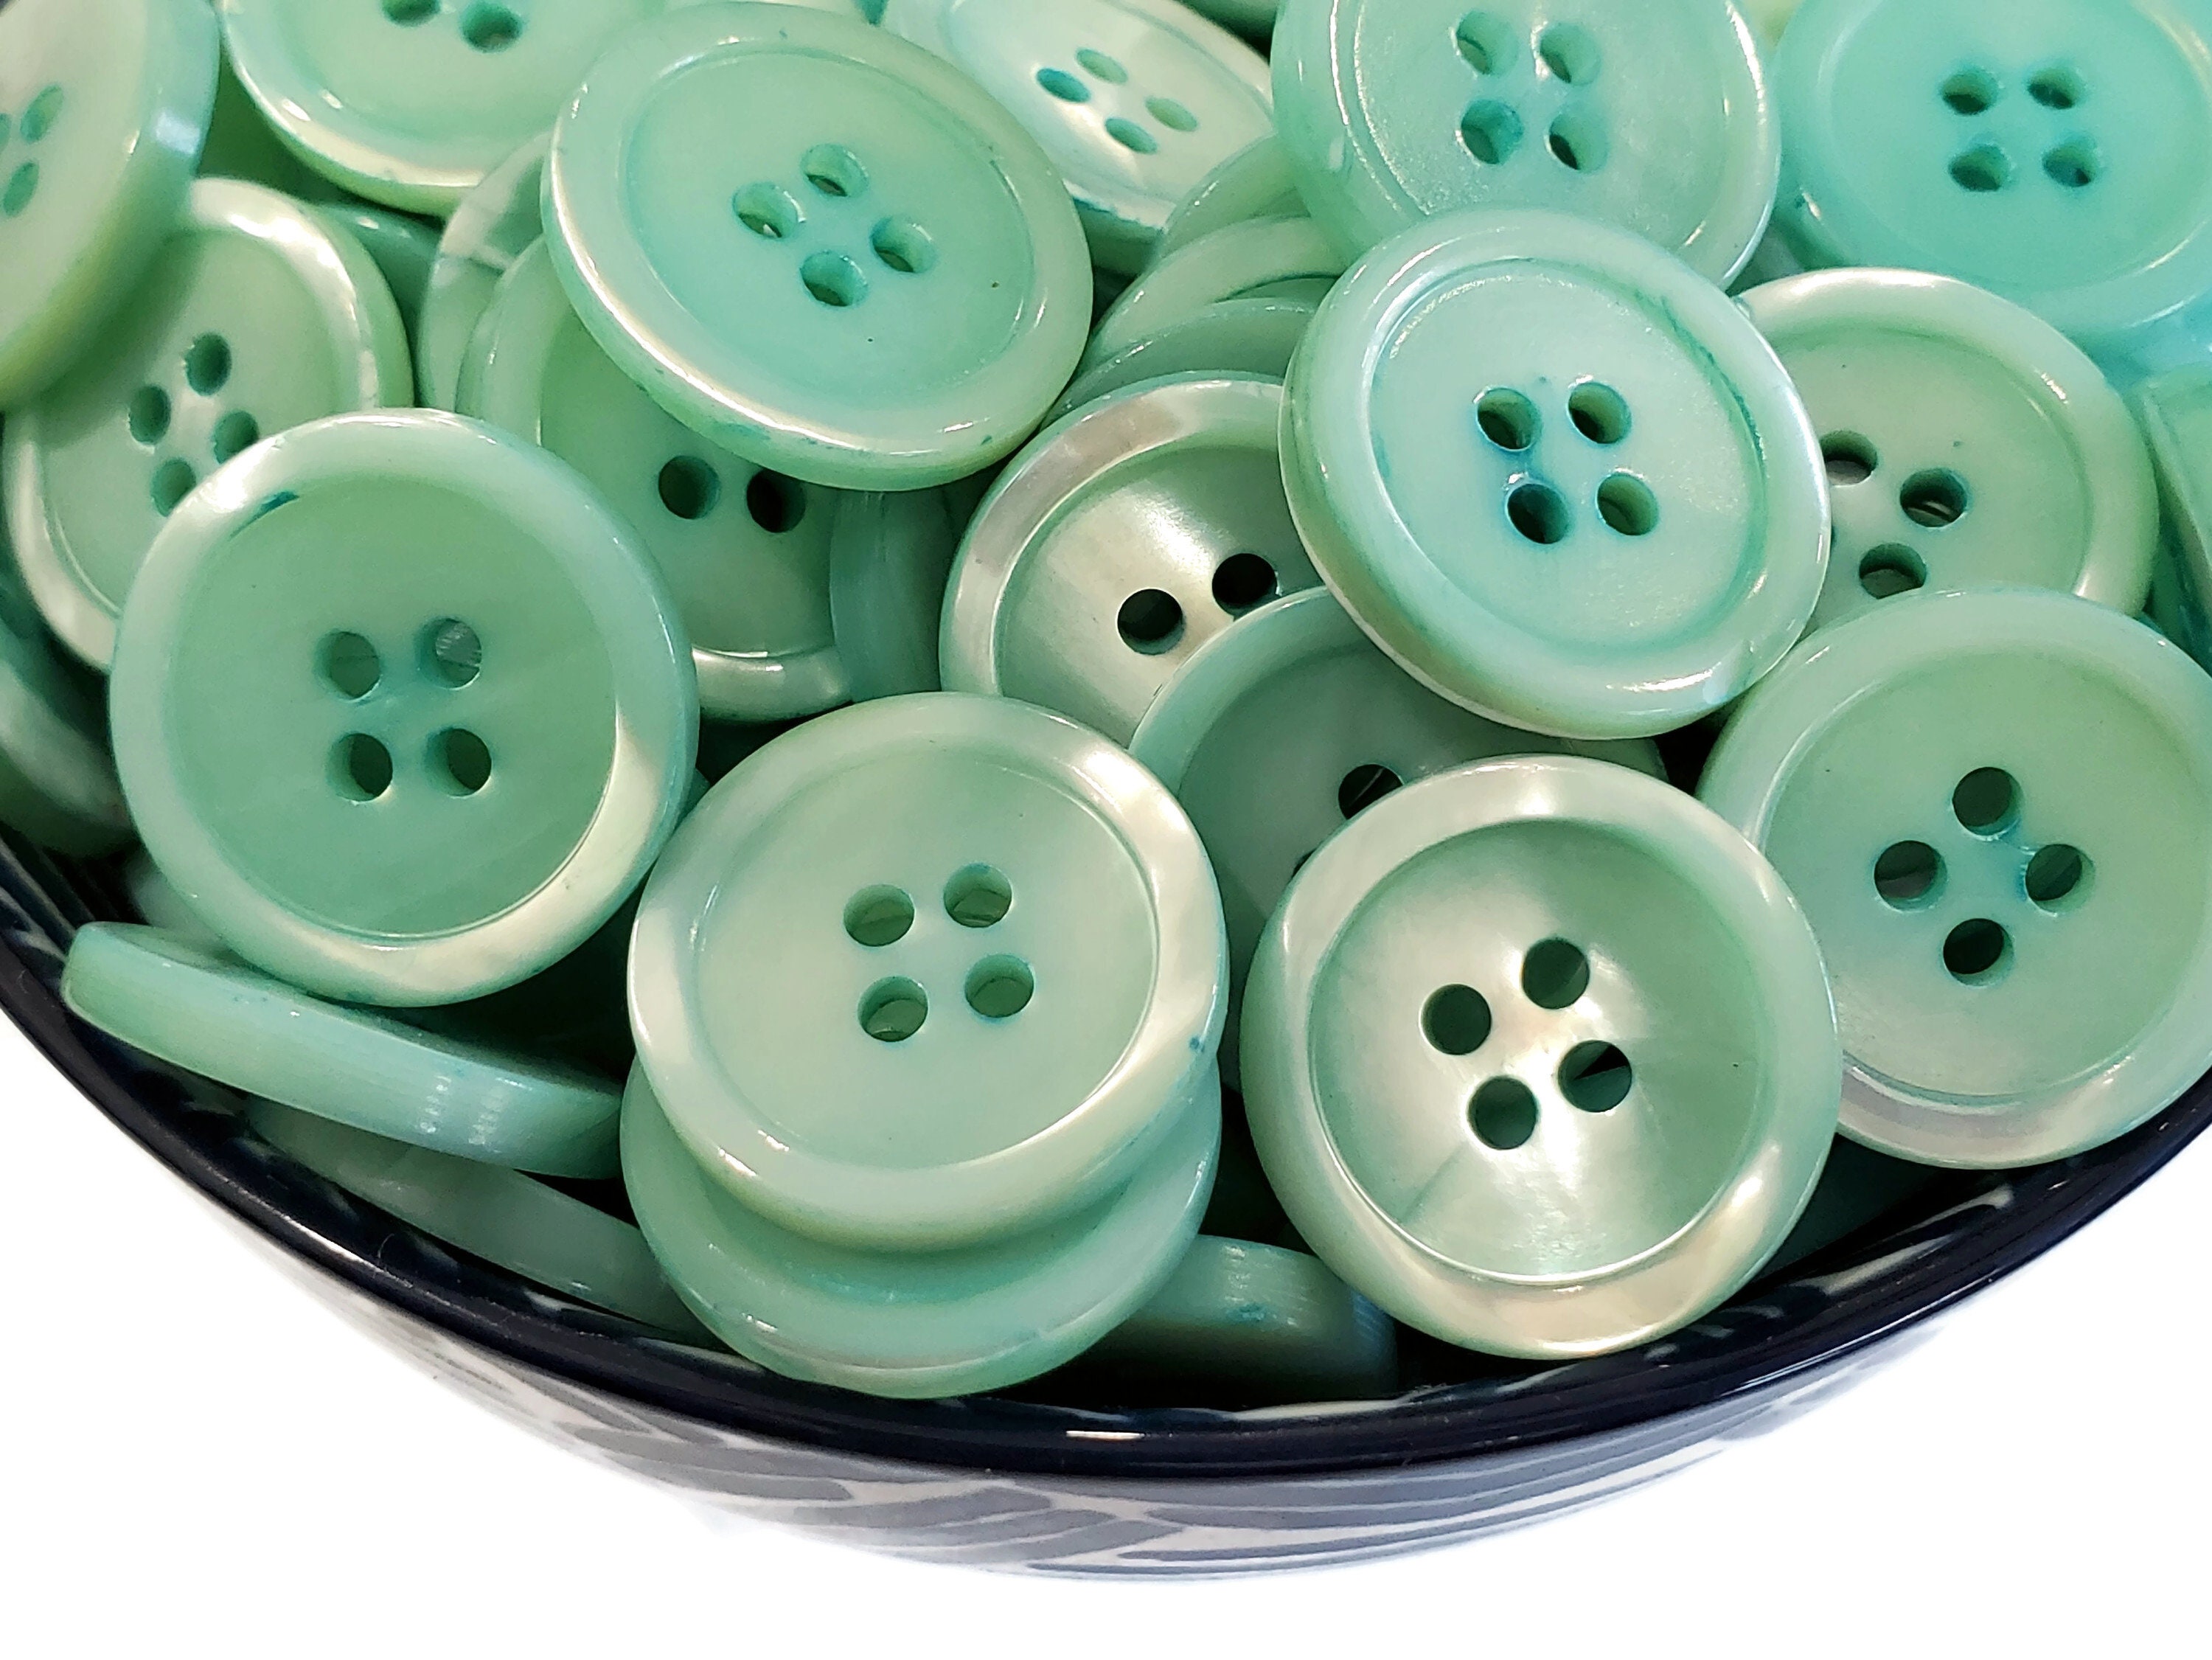 200 Small Caribbean Wave Buttons, Many Small Sizes and Styles